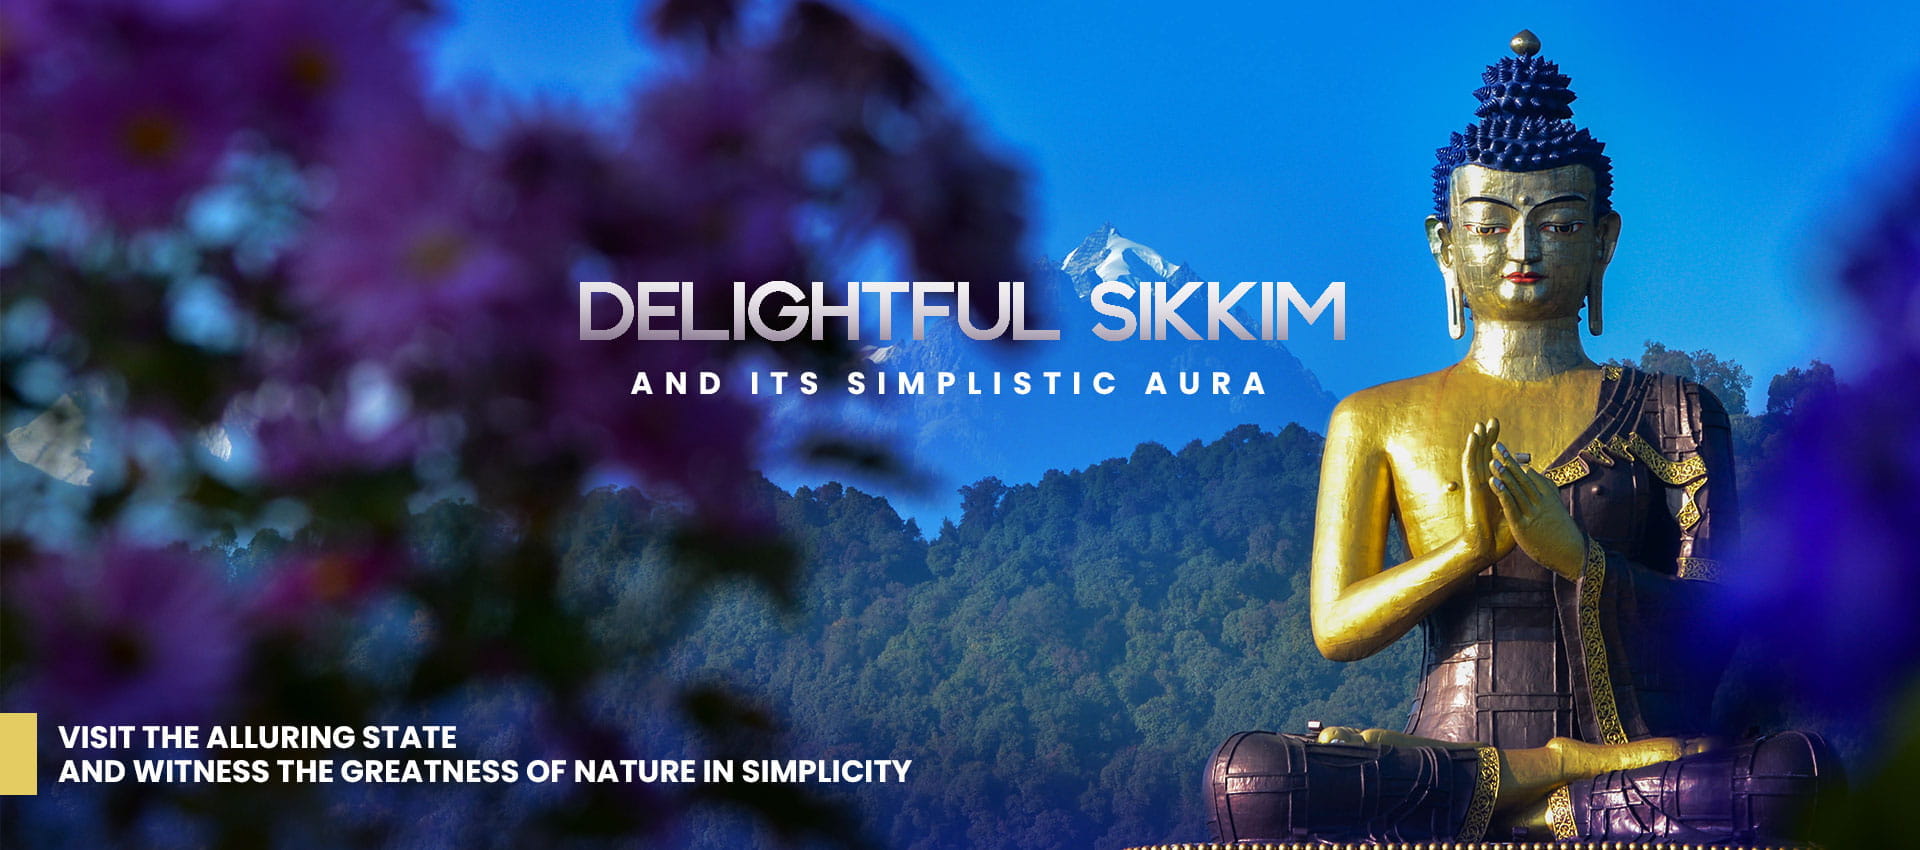 Delightful Sikkim and its simplistic aura